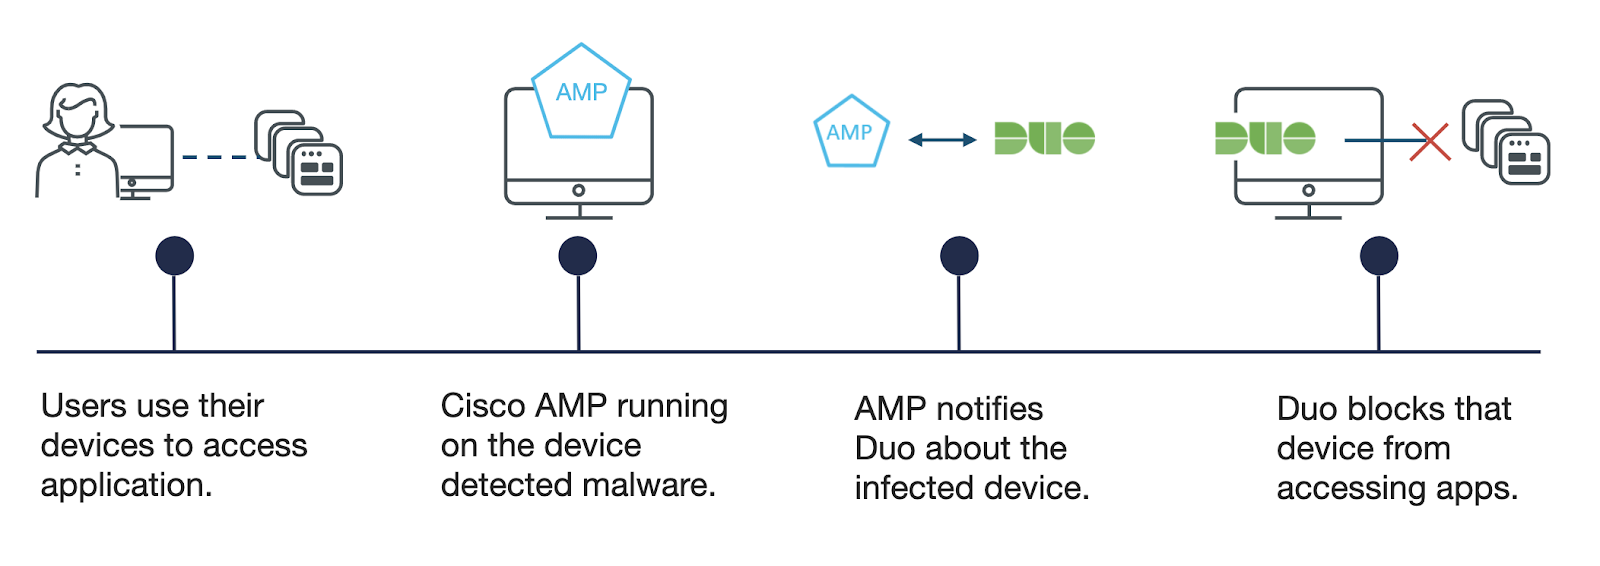 Users use devices to access application. Cisco AMP on the device detects malware. AMP notifies Duo. Duo blocks device.